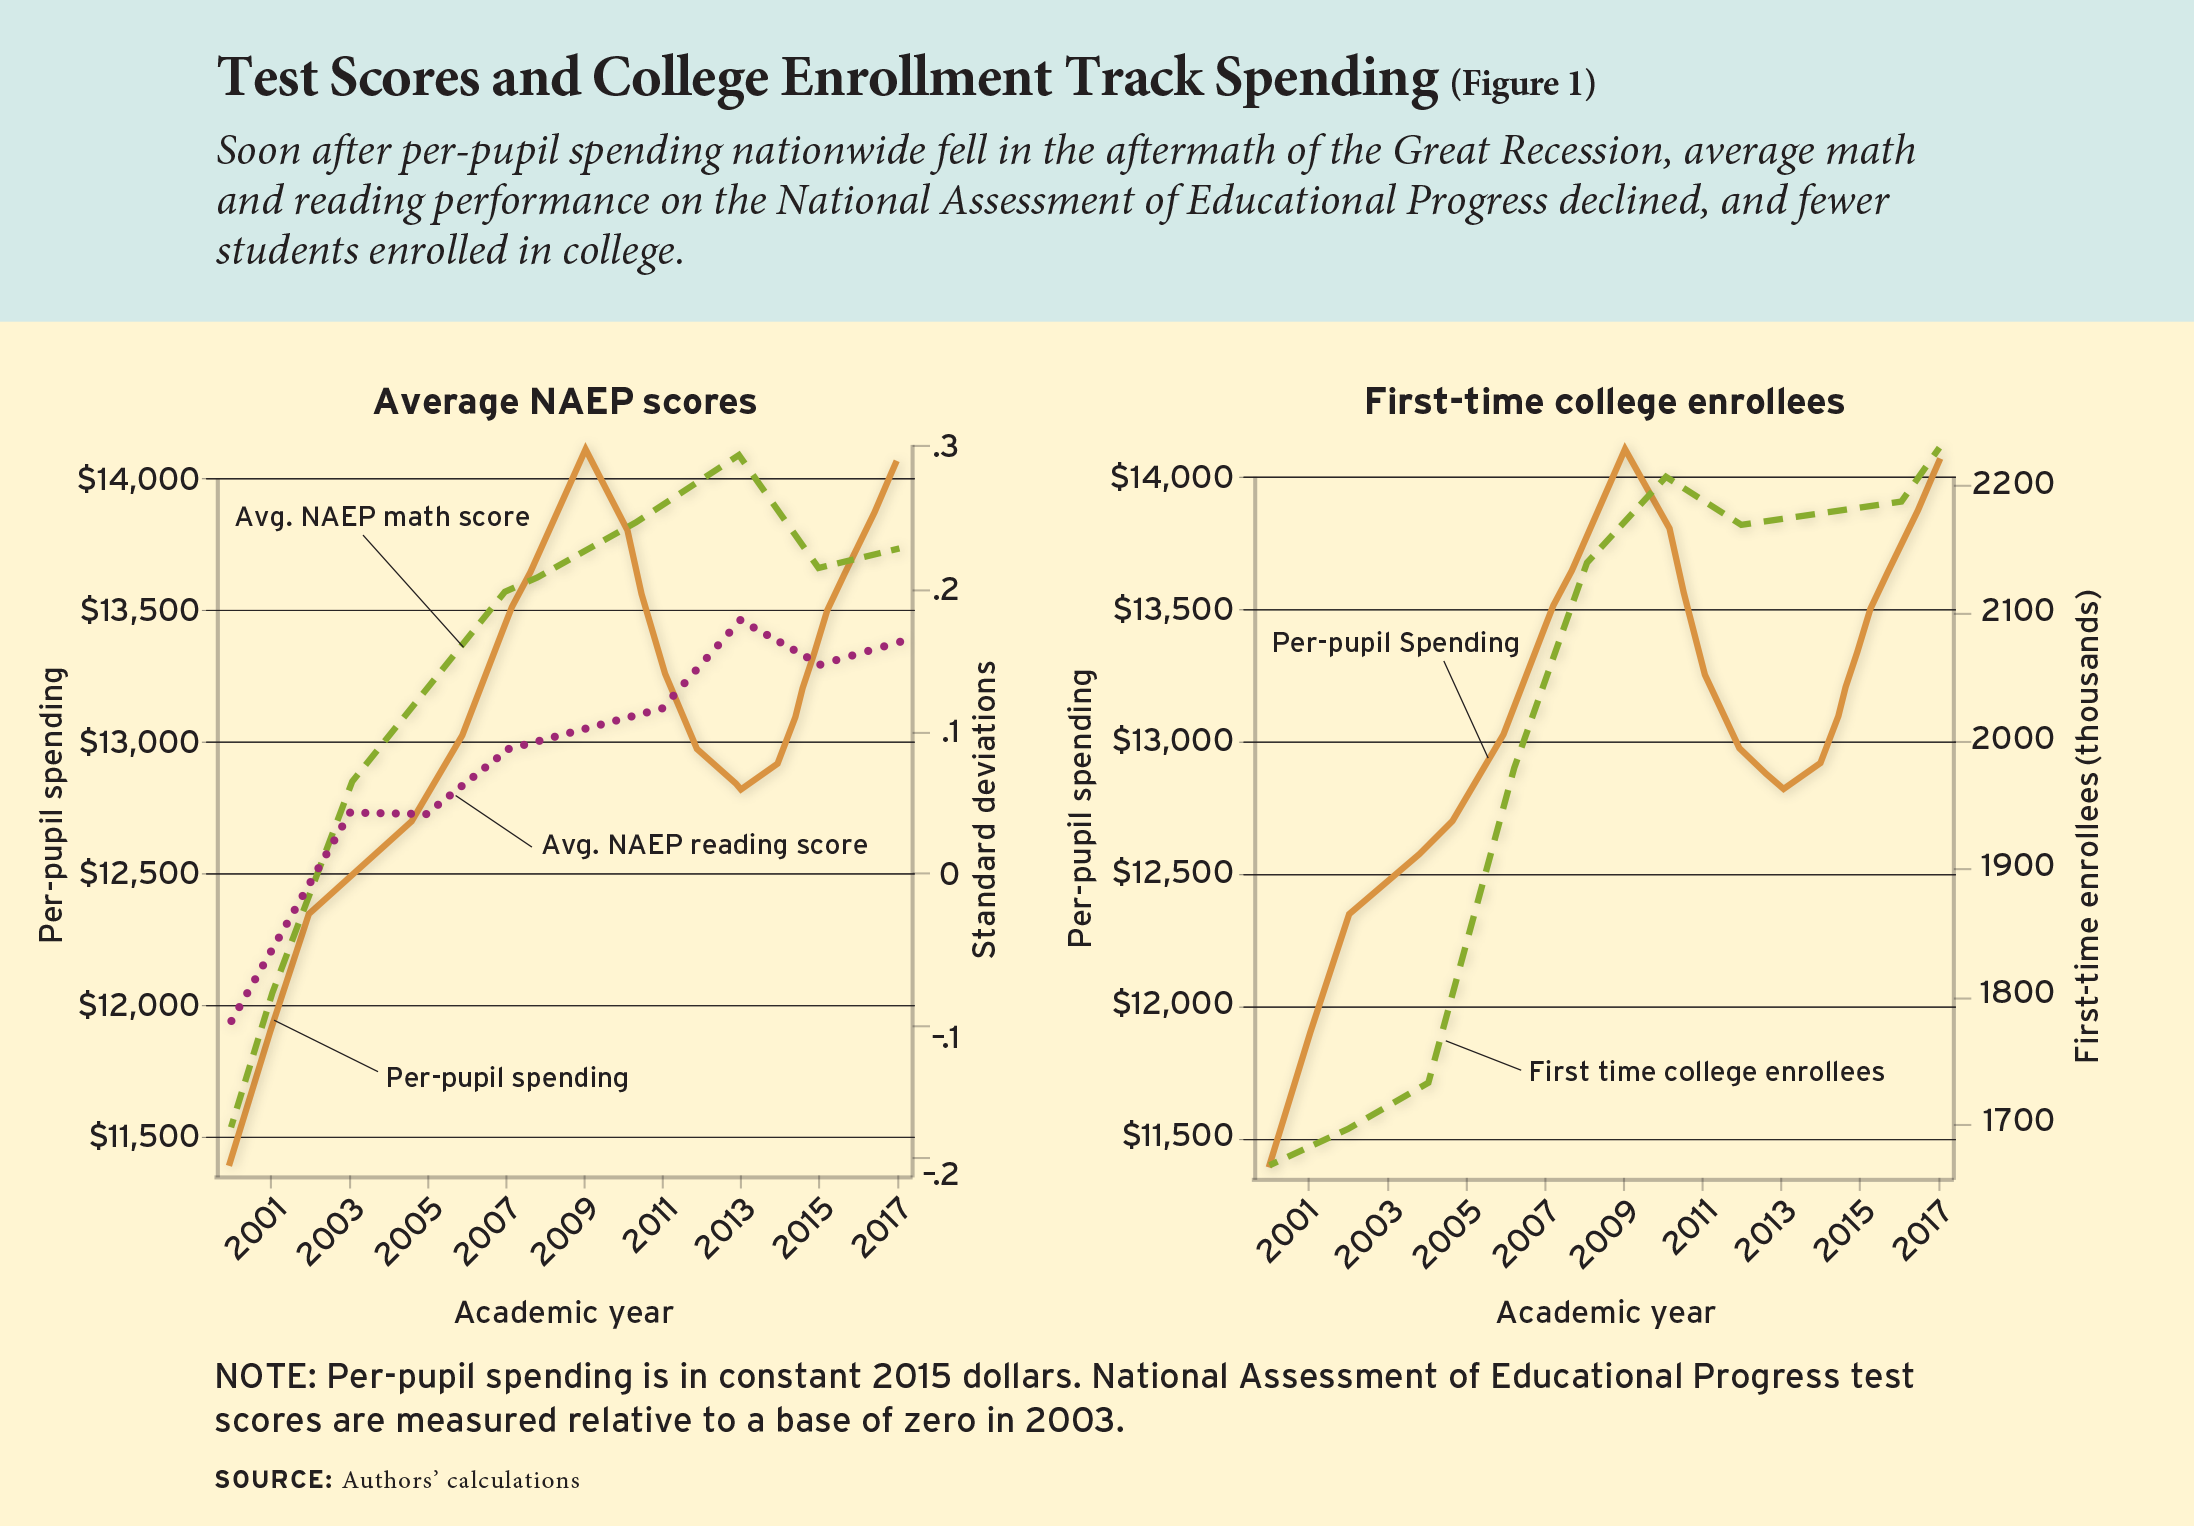 Figure 1: Test Scores and College Enrollment Track Spending